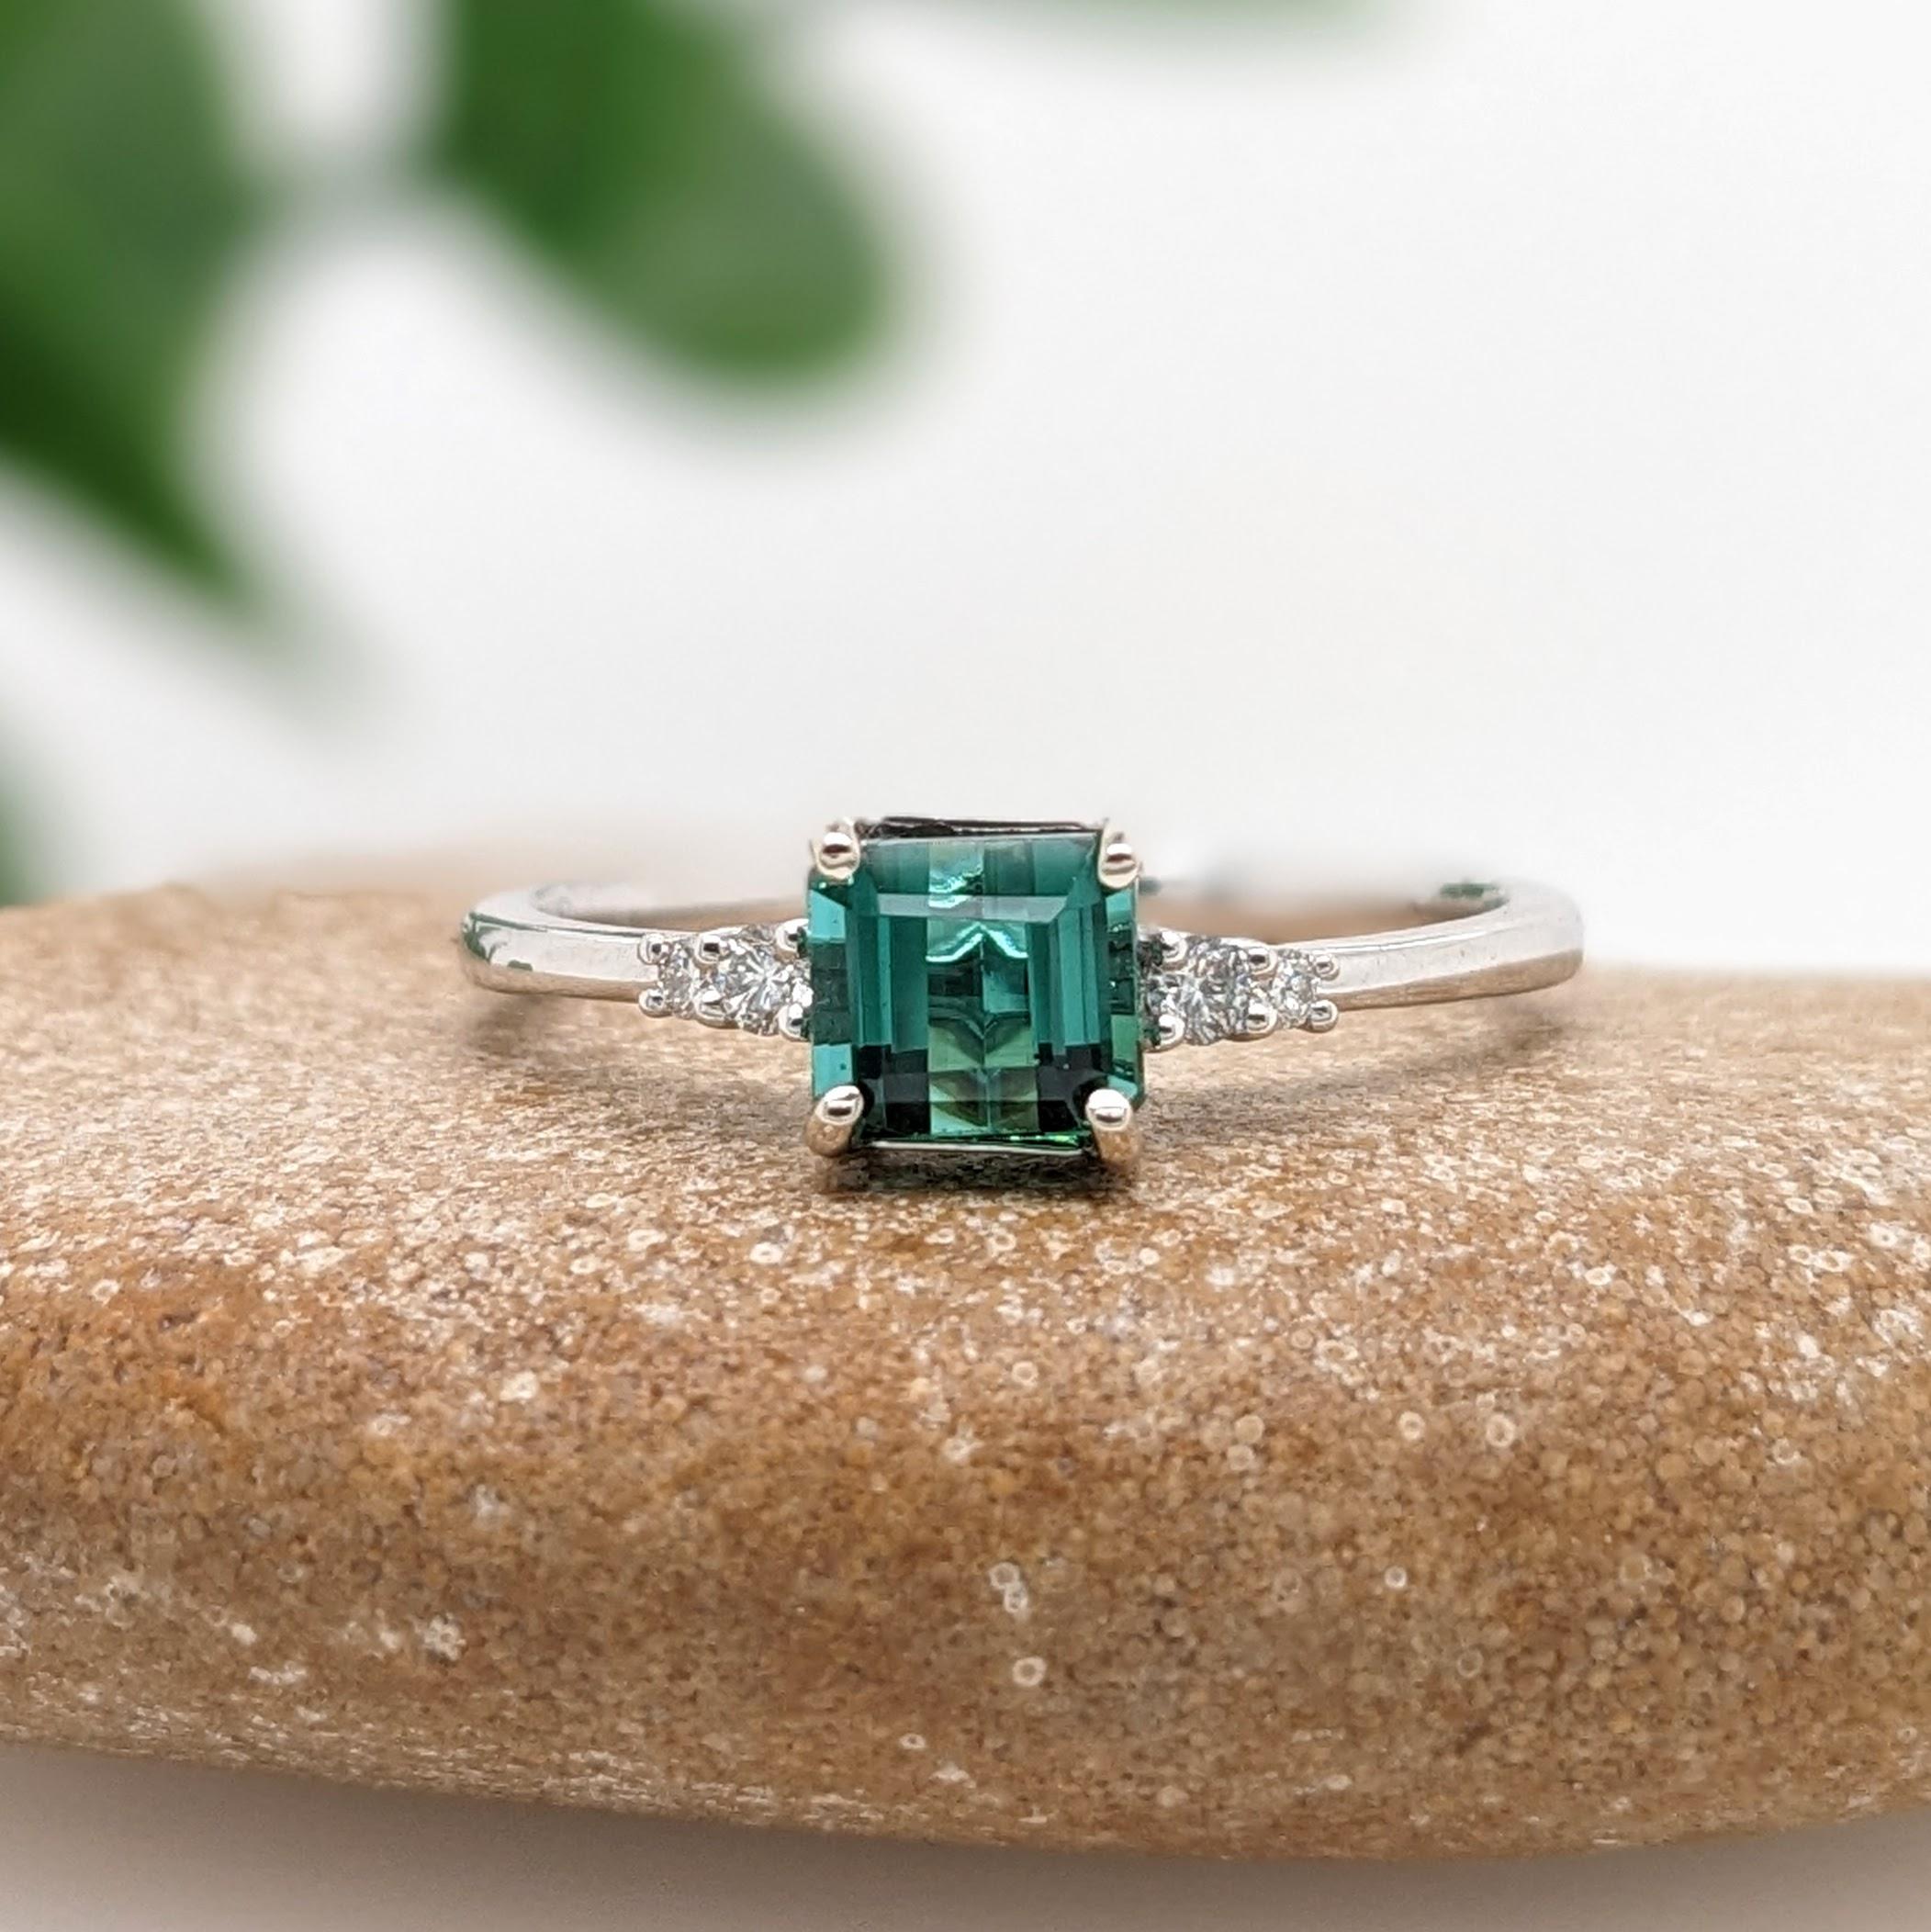 A vivid green Tourmaline looks exquisite in this elegant minimalist ring with cute round diamond accents. A statement ring design perfect for an eye catching engagement or anniversary. This ring also makes a beautiful October birthstone ring for